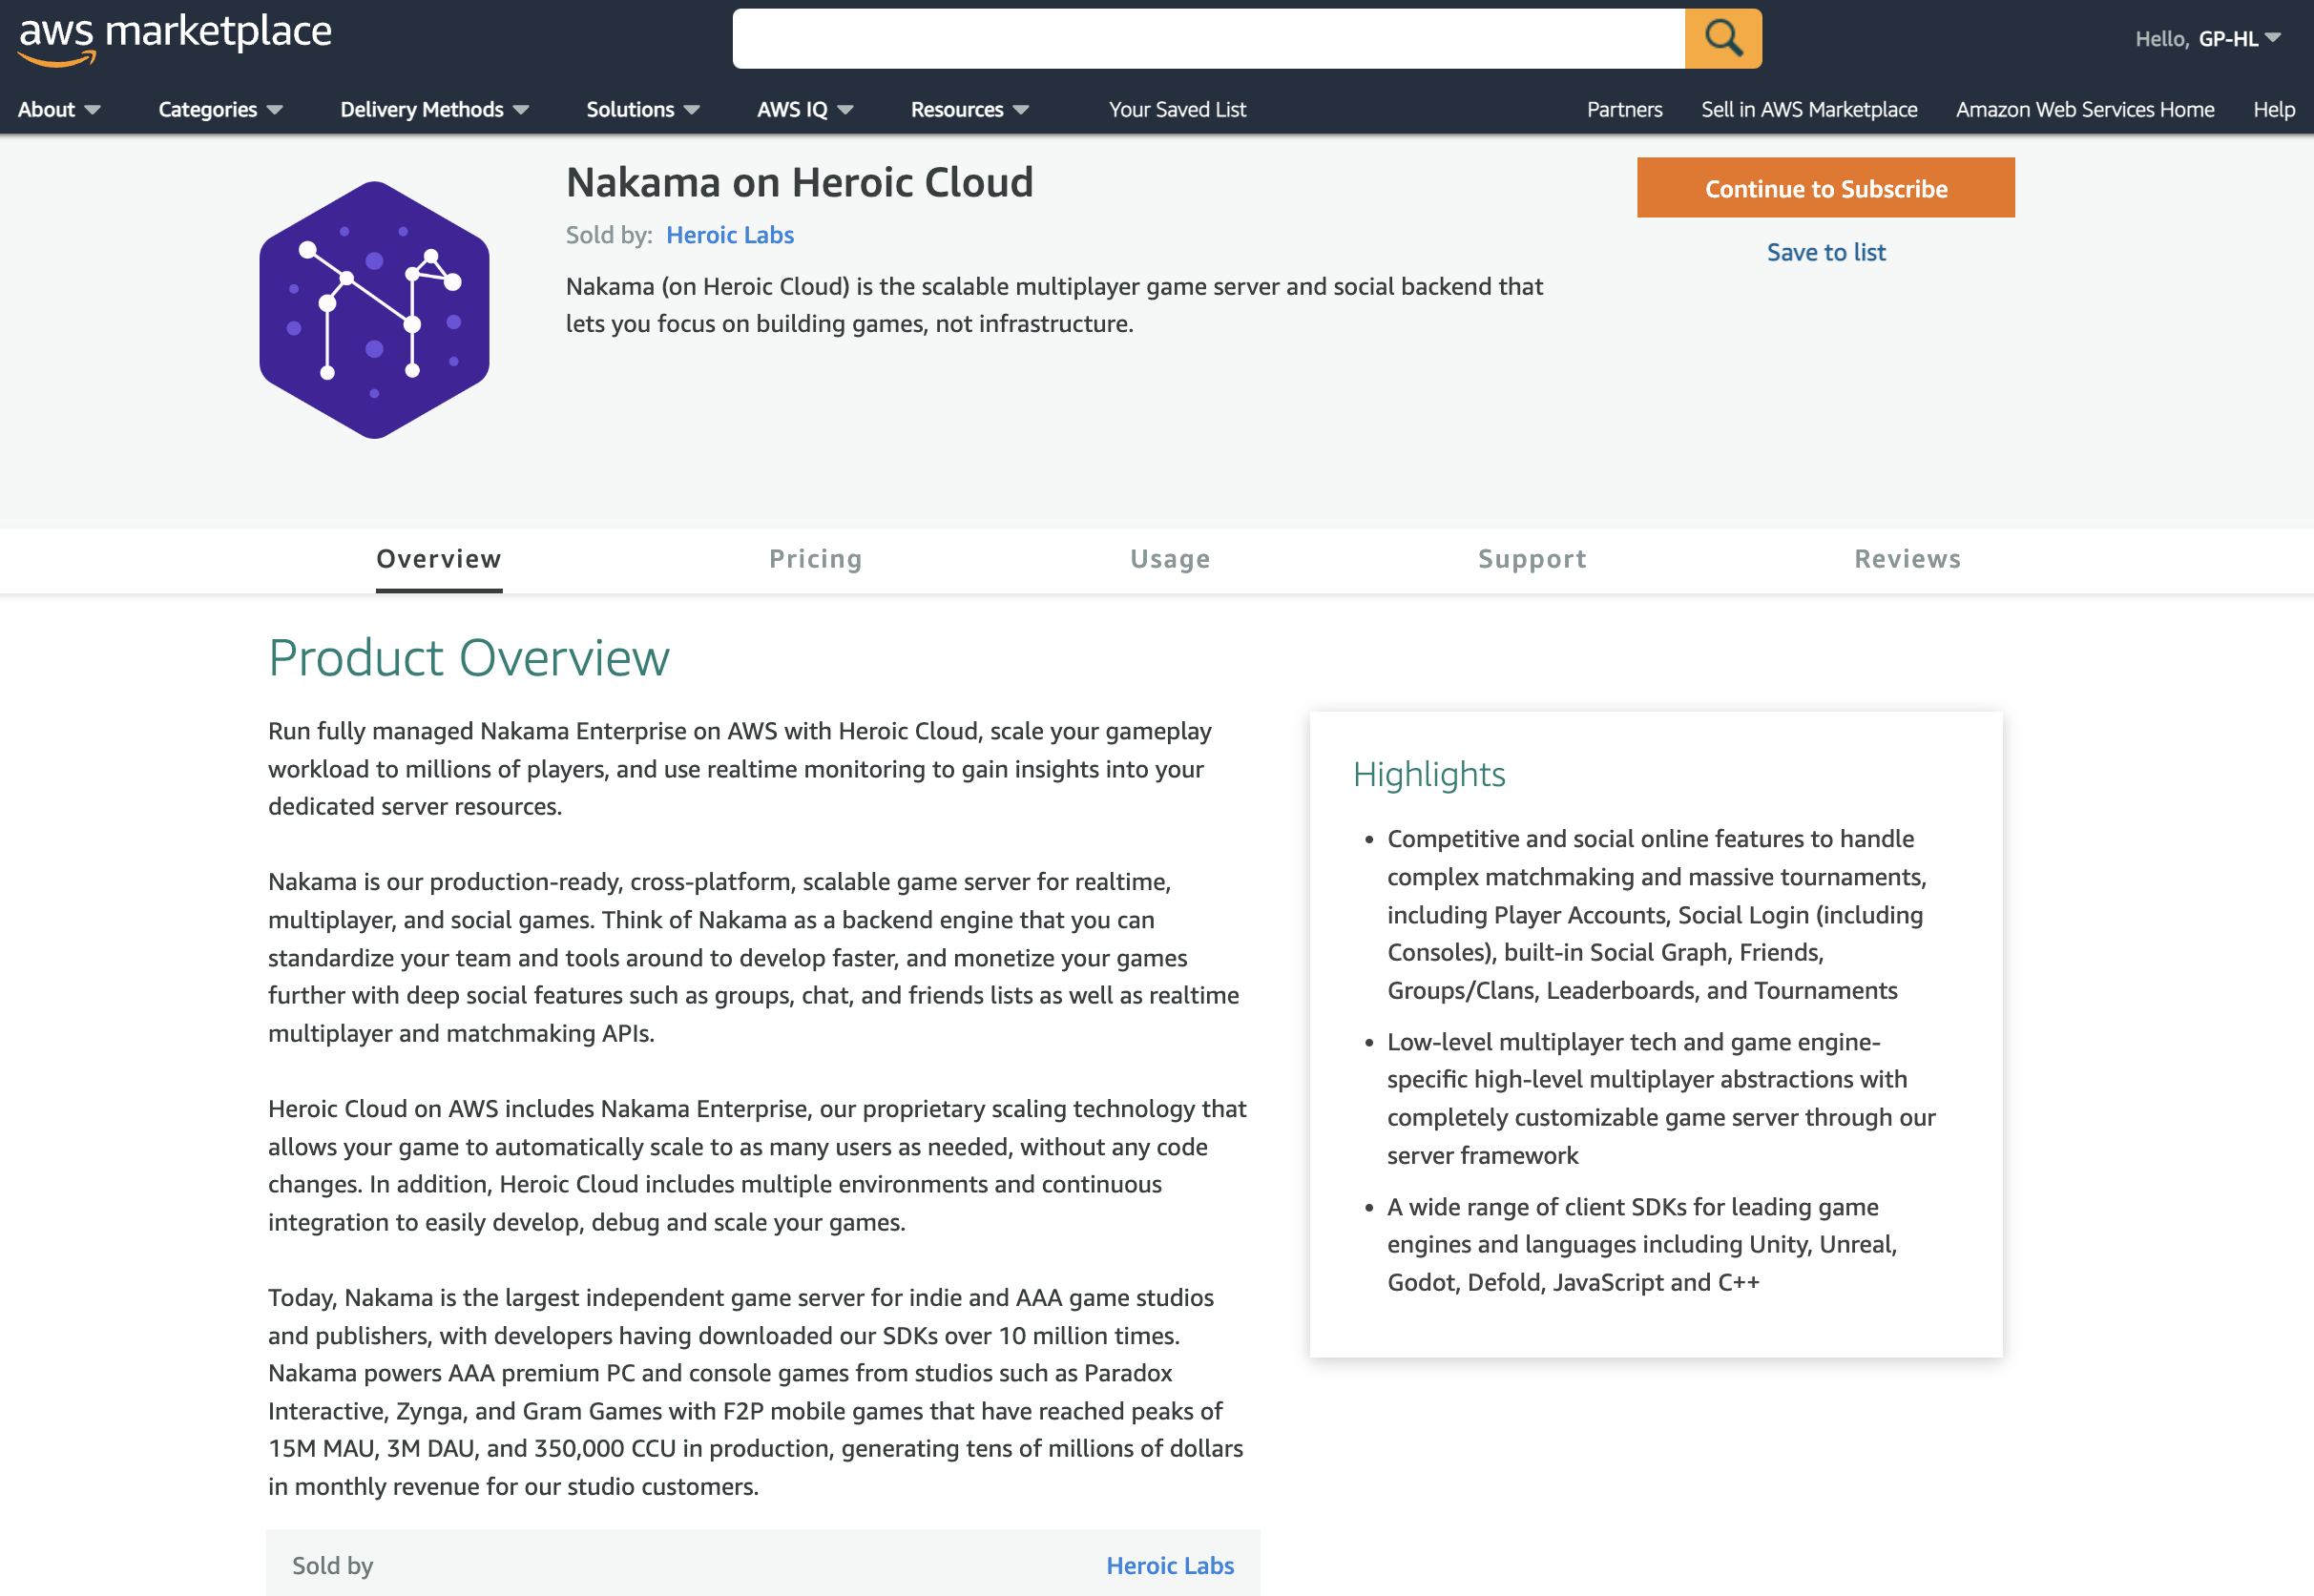 AWS Marketplace: Nakama on Heroic Cloud product page